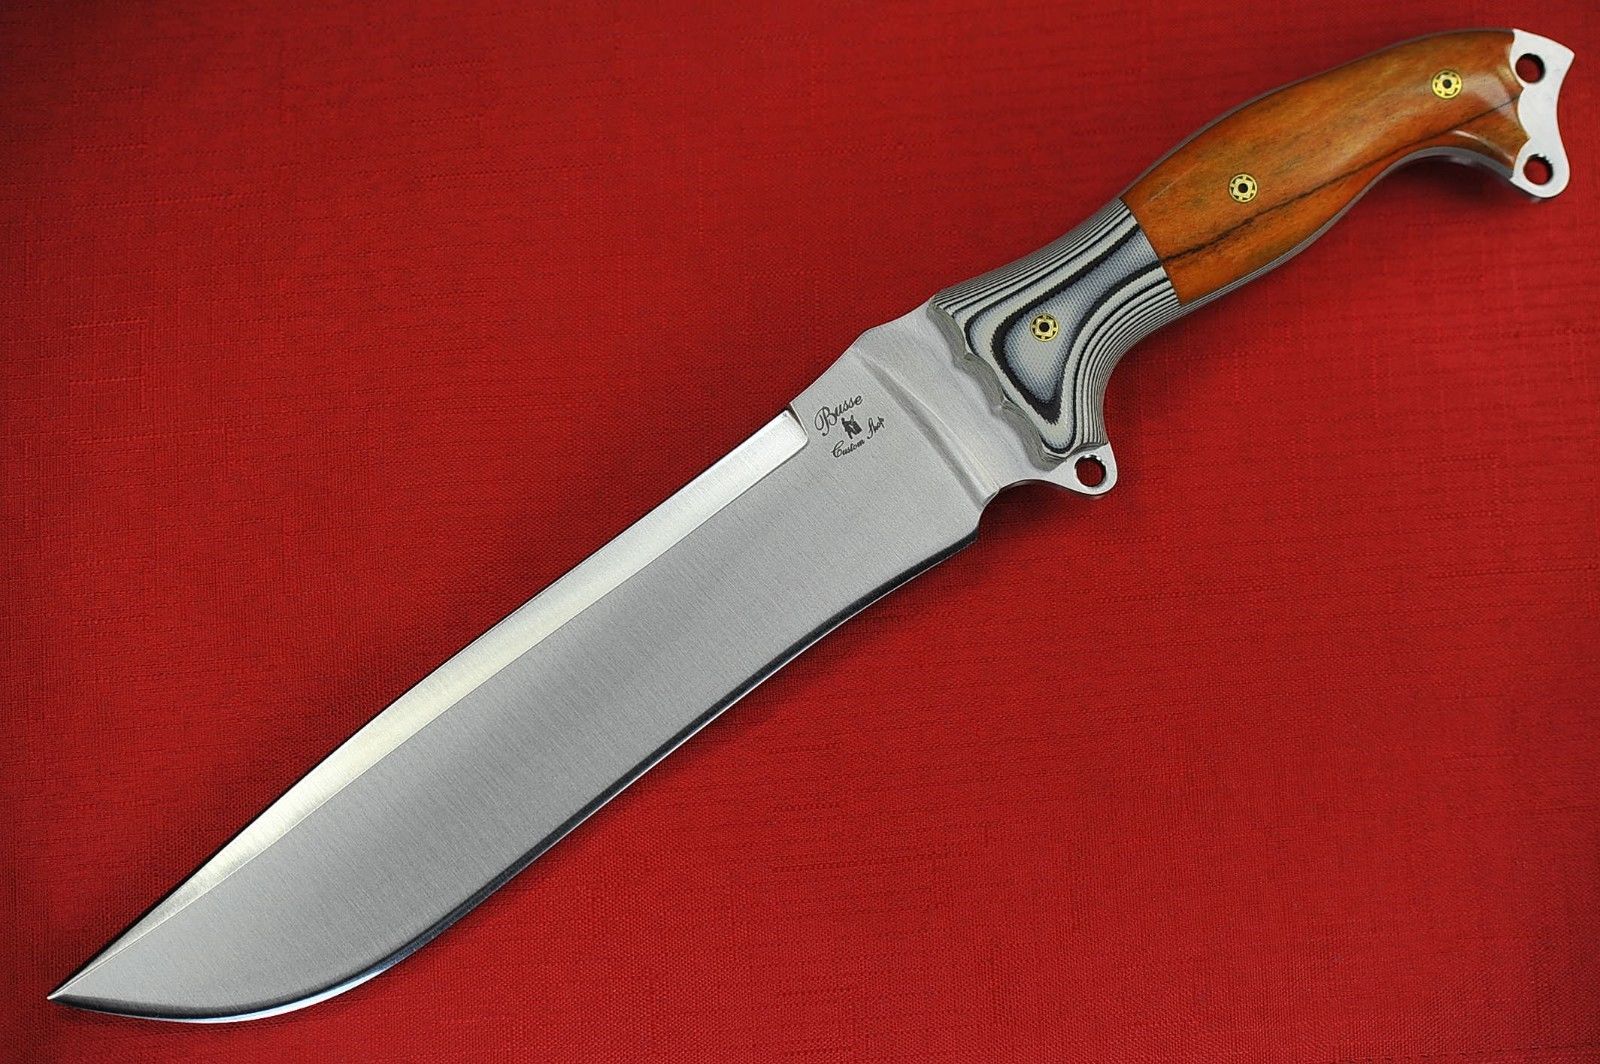 a very nice looking knife on a red cloth